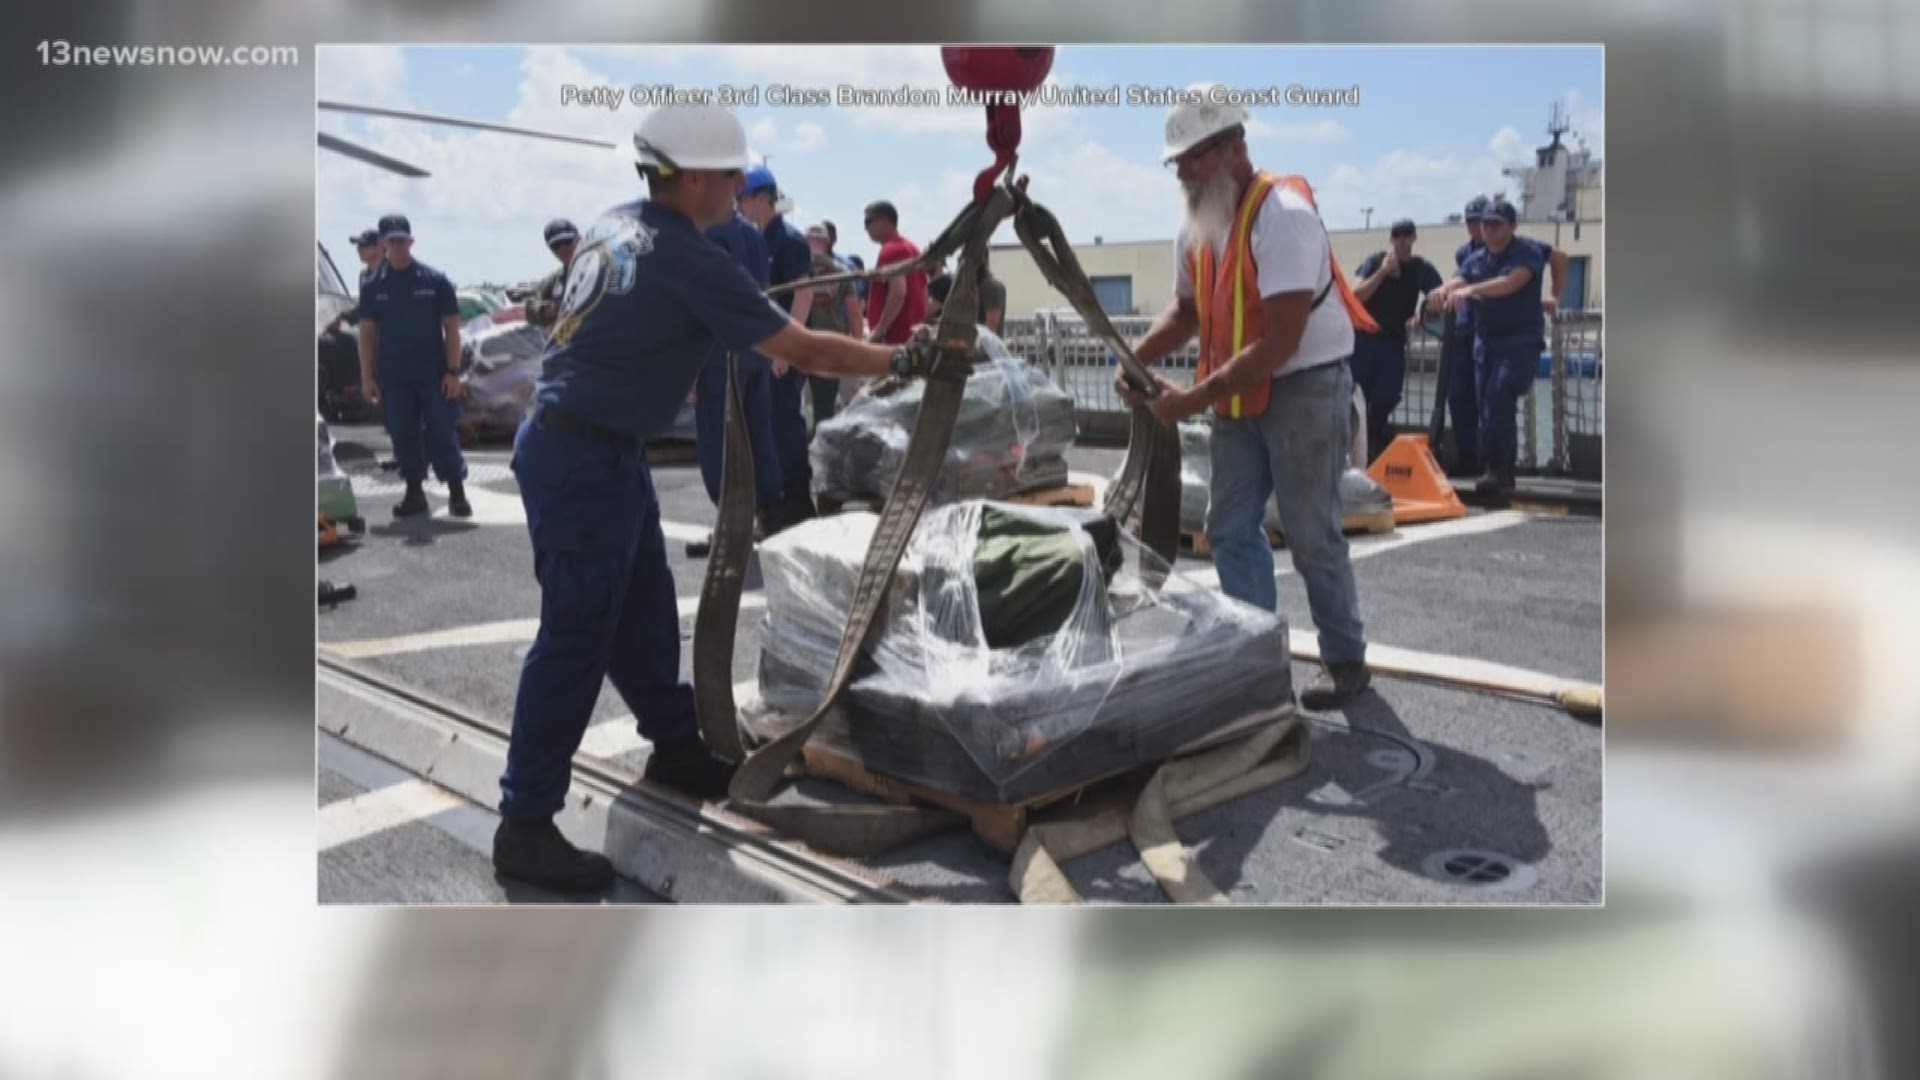 The drugs were offloaded Thursday morning on the Coast Guard Cutter Bear, which is based out of Portsmouth.